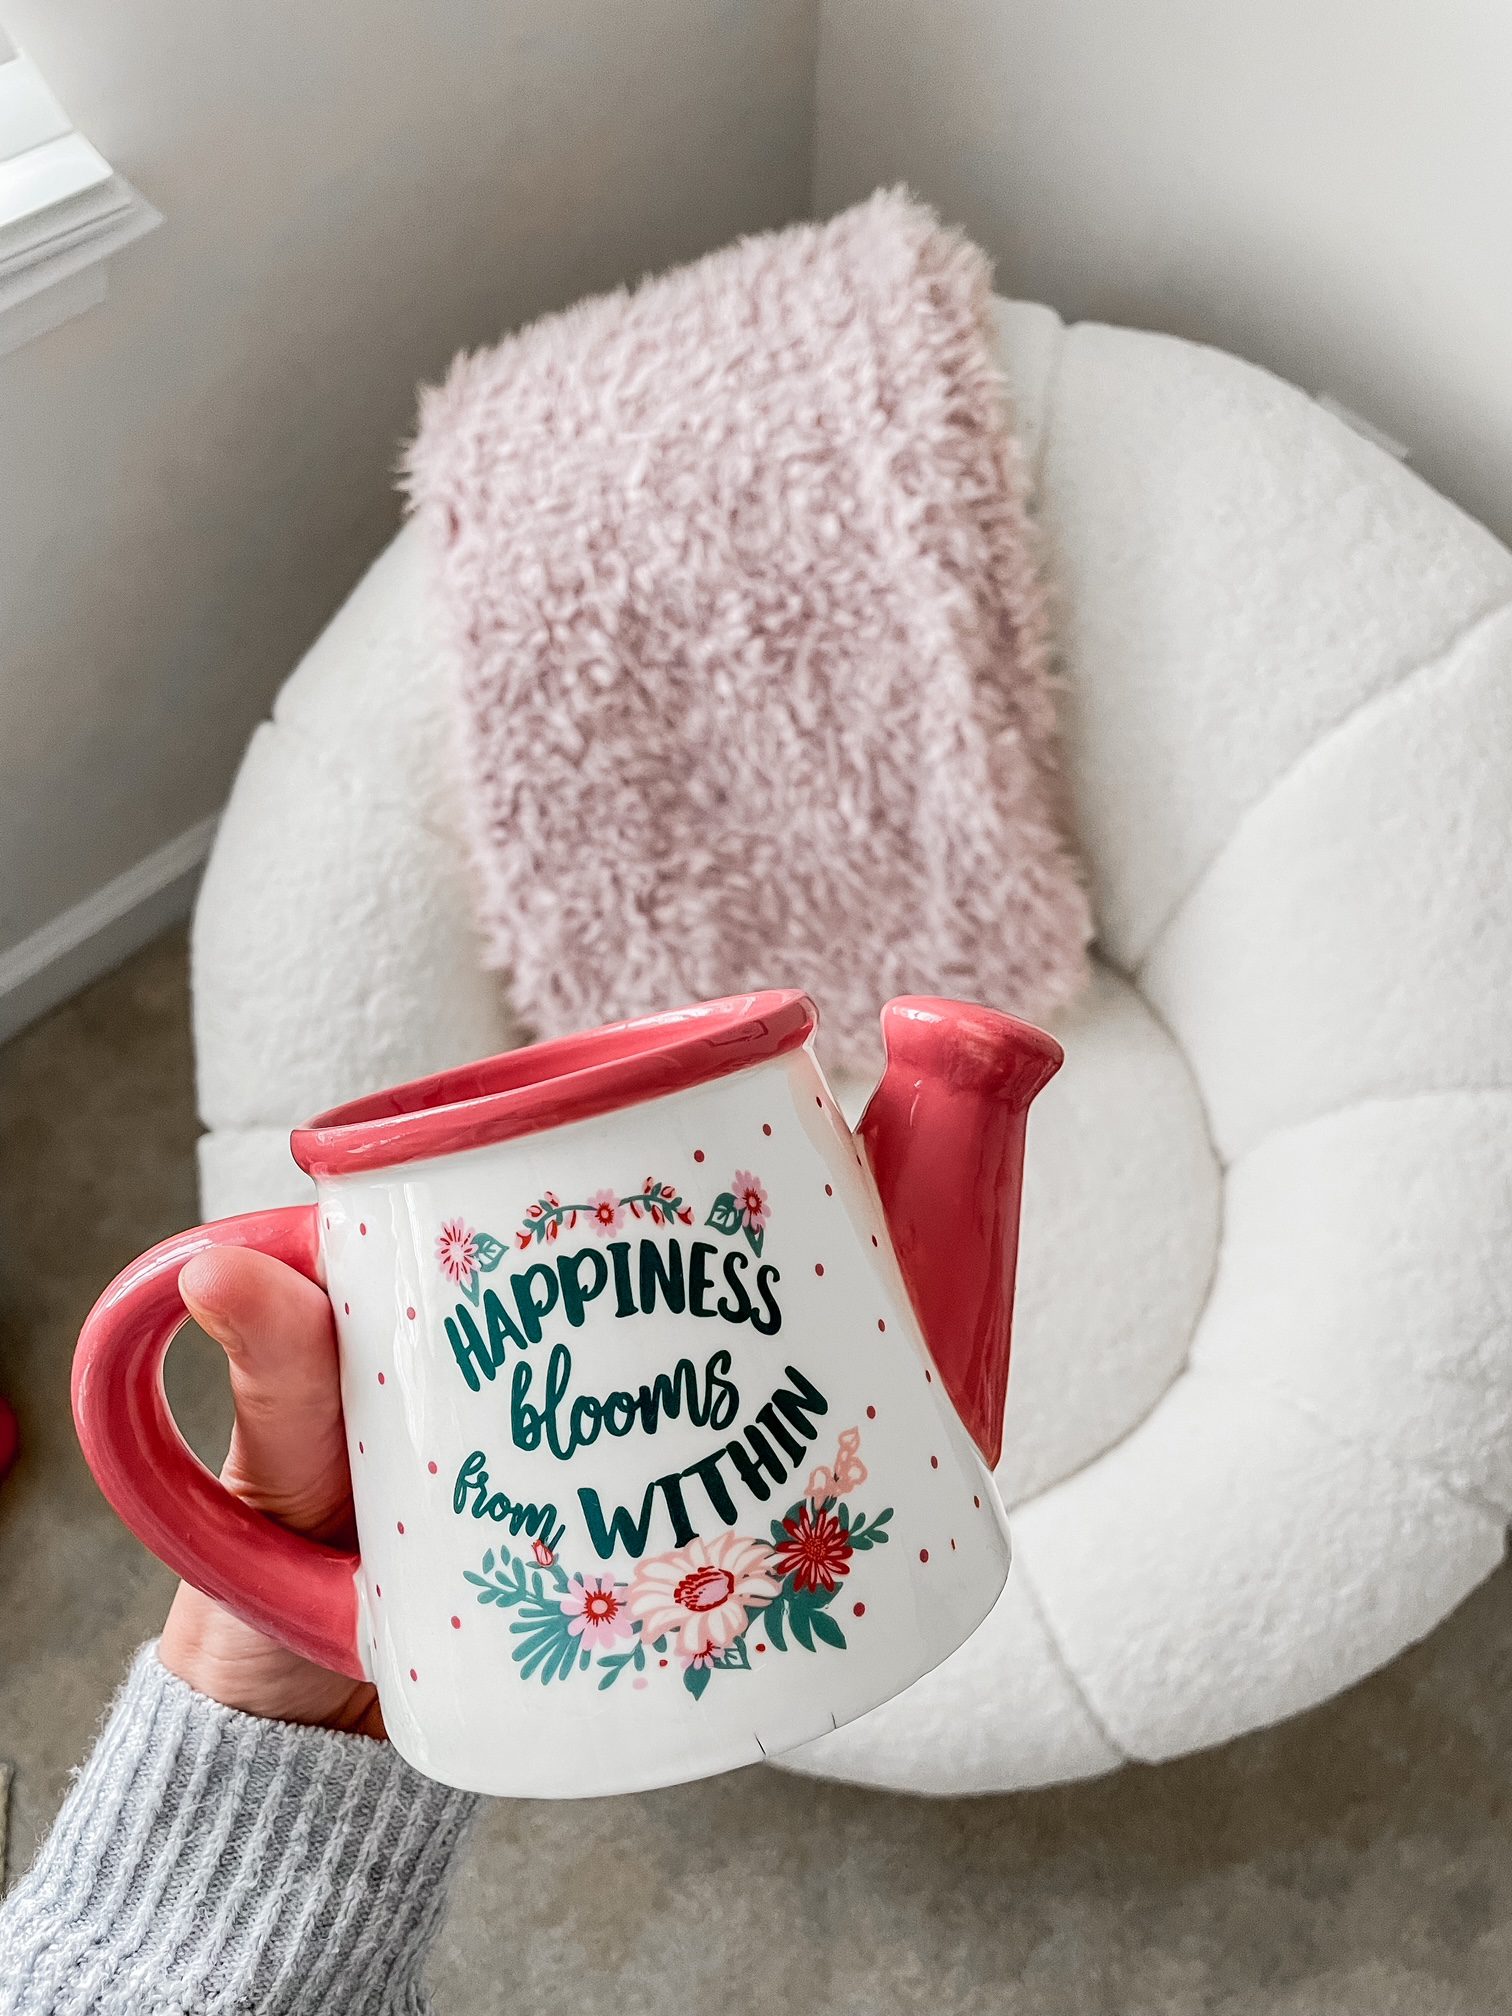 HAPPINESS BLOOMS FROM WITHIN - Disney Minnie Mouse mug